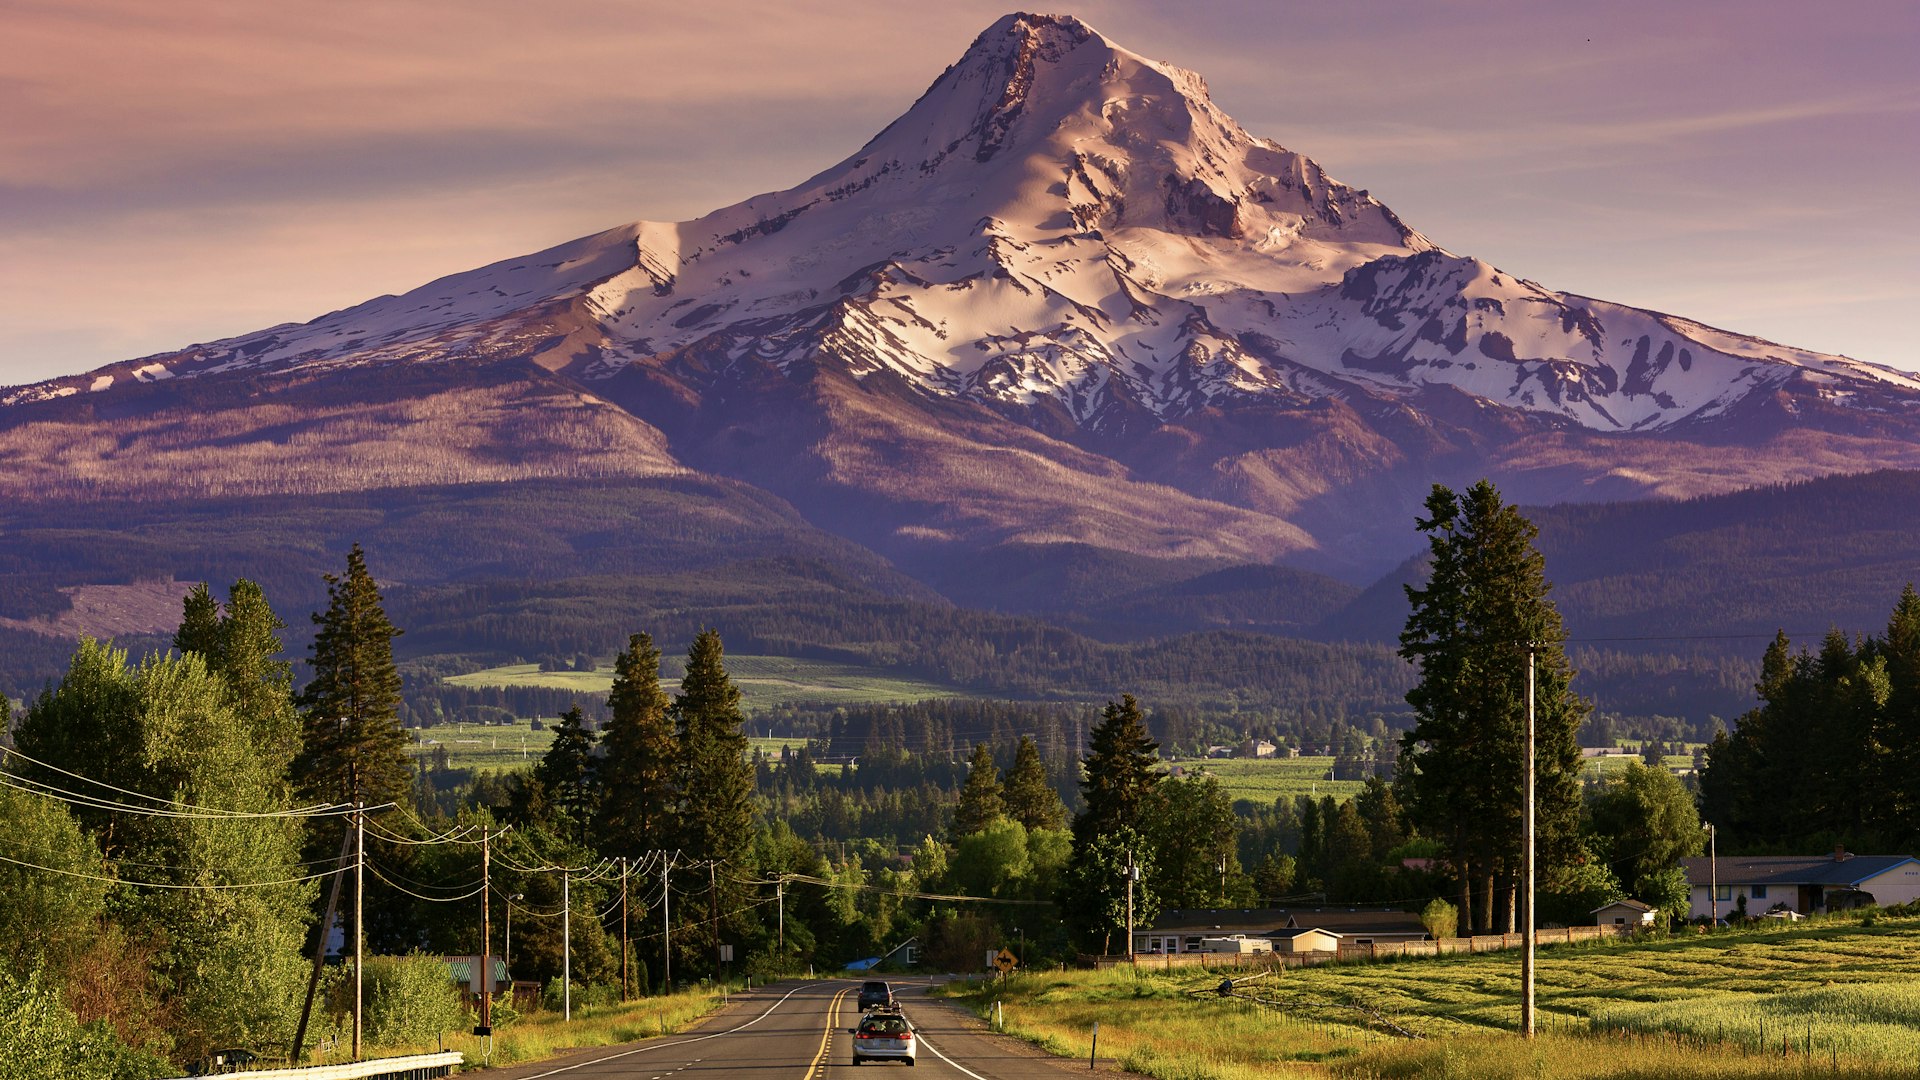 Route 35 leading to snow-covered Mount Hood, Oregon, at sunset, with two cars on road.